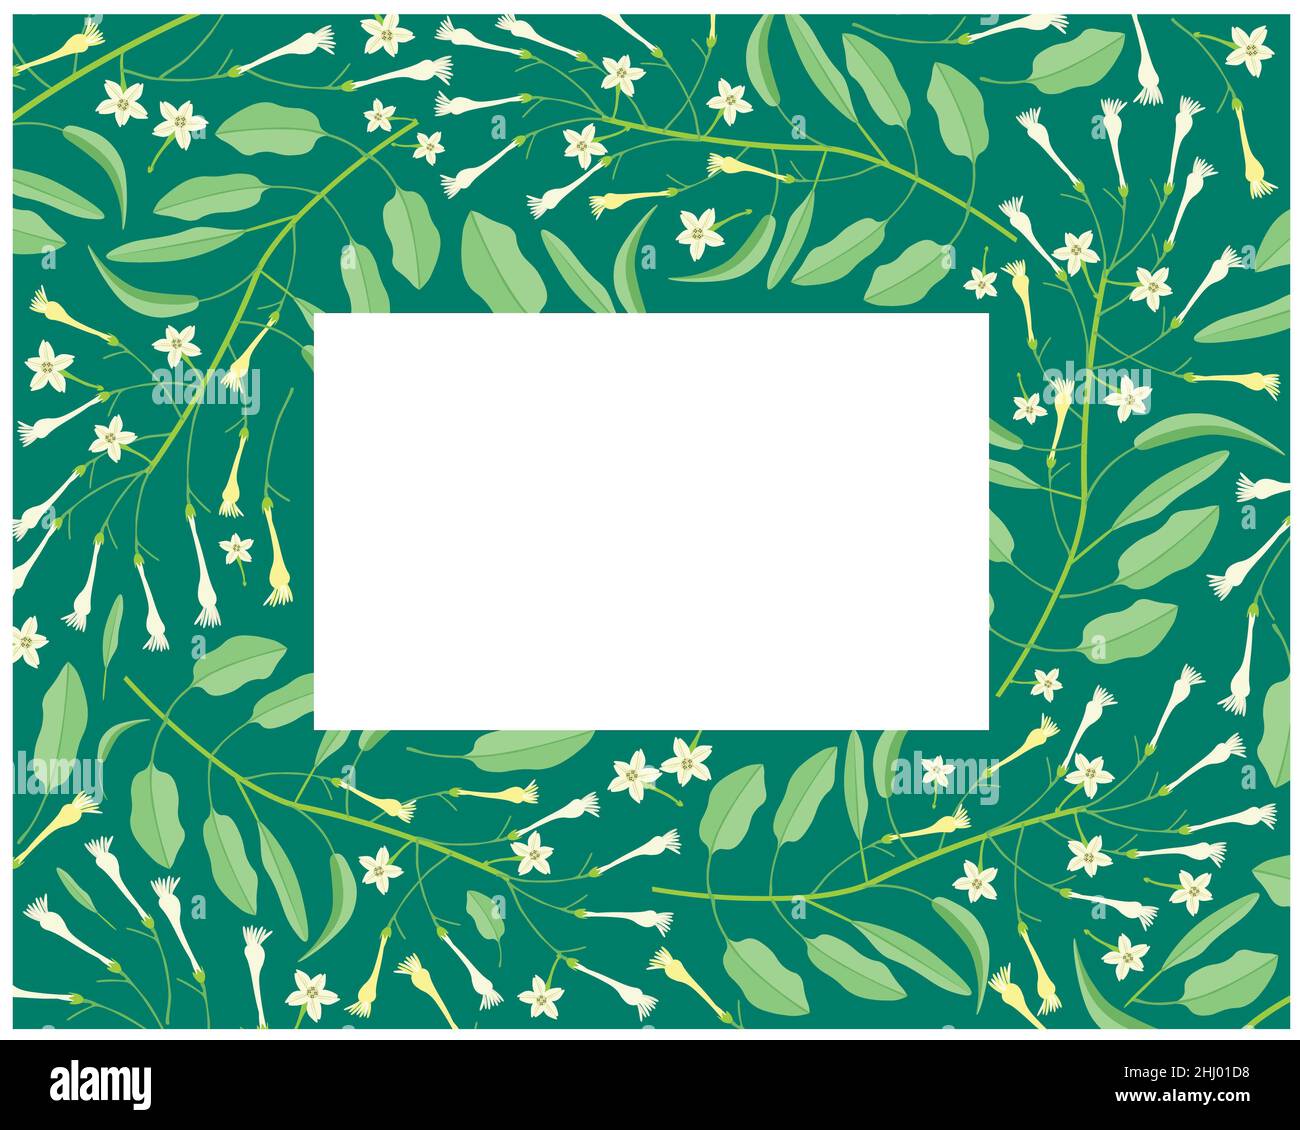 Beautiful Flower, Illustration Frame of White Tuberose Flowers or Night Blooming Jasmine with Green Leaves. Stock Photo